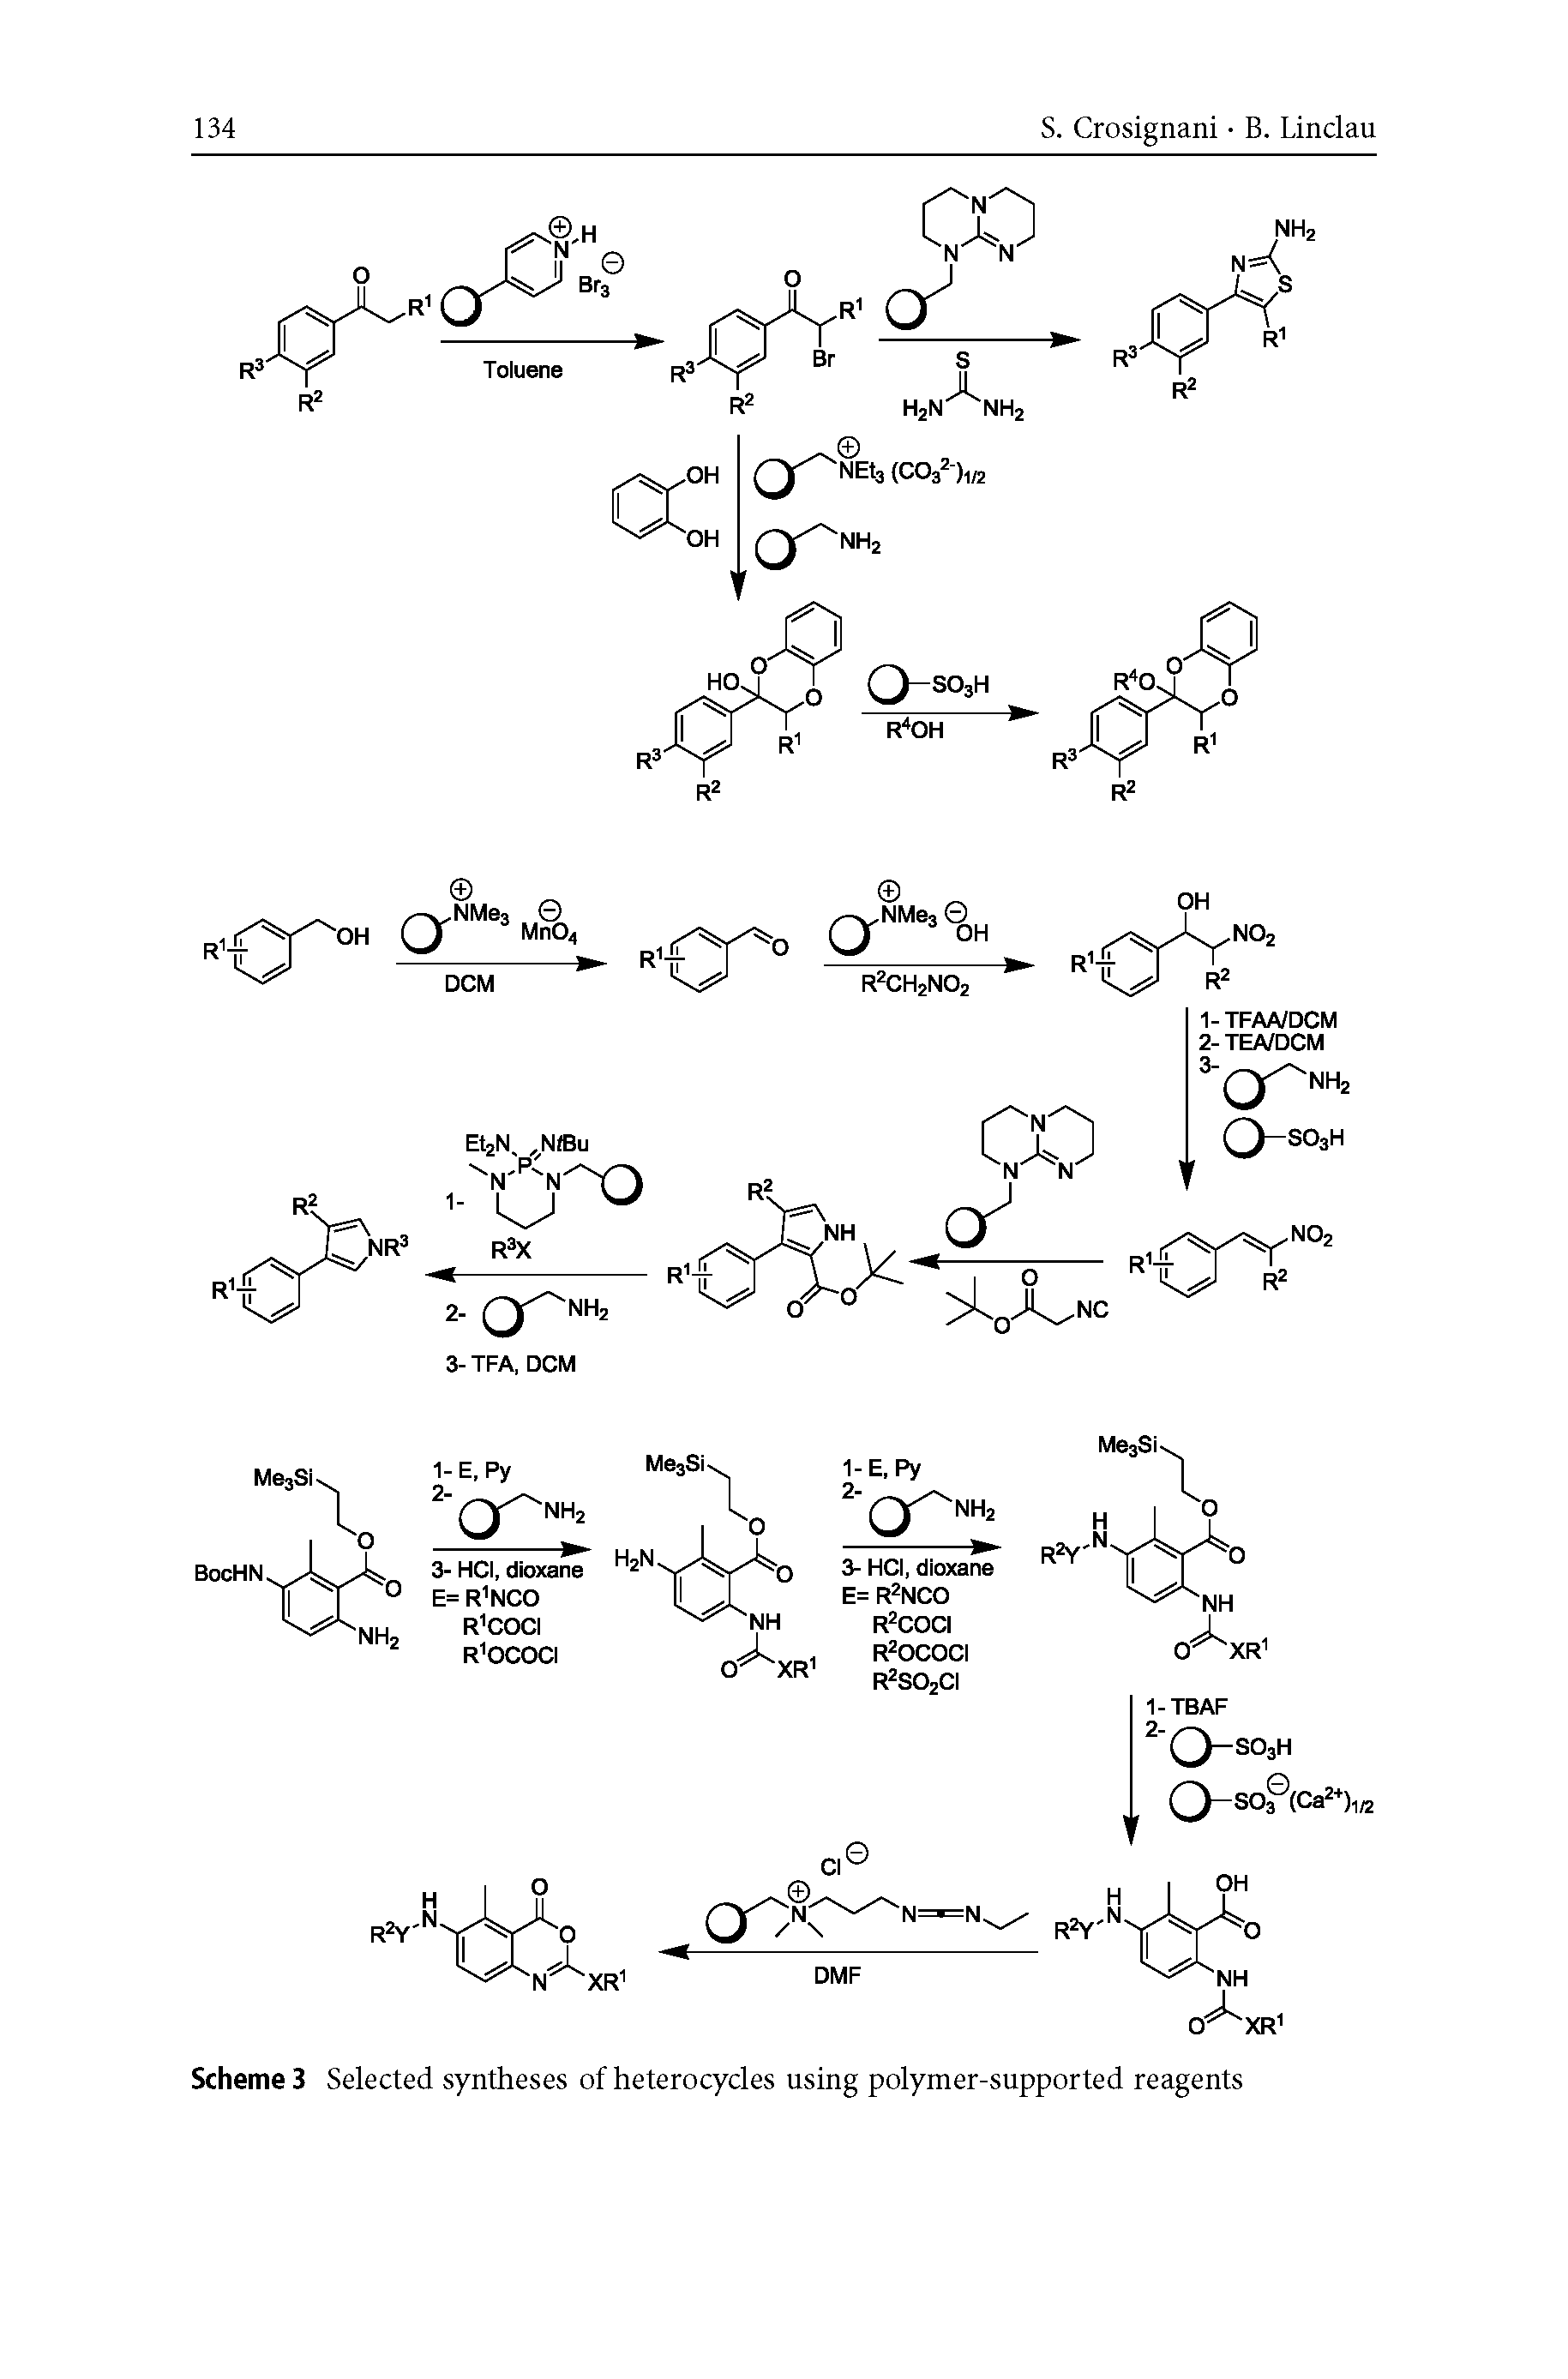 Scheme 3 Selected syntheses of heterocycles using polymer-supported reagents...